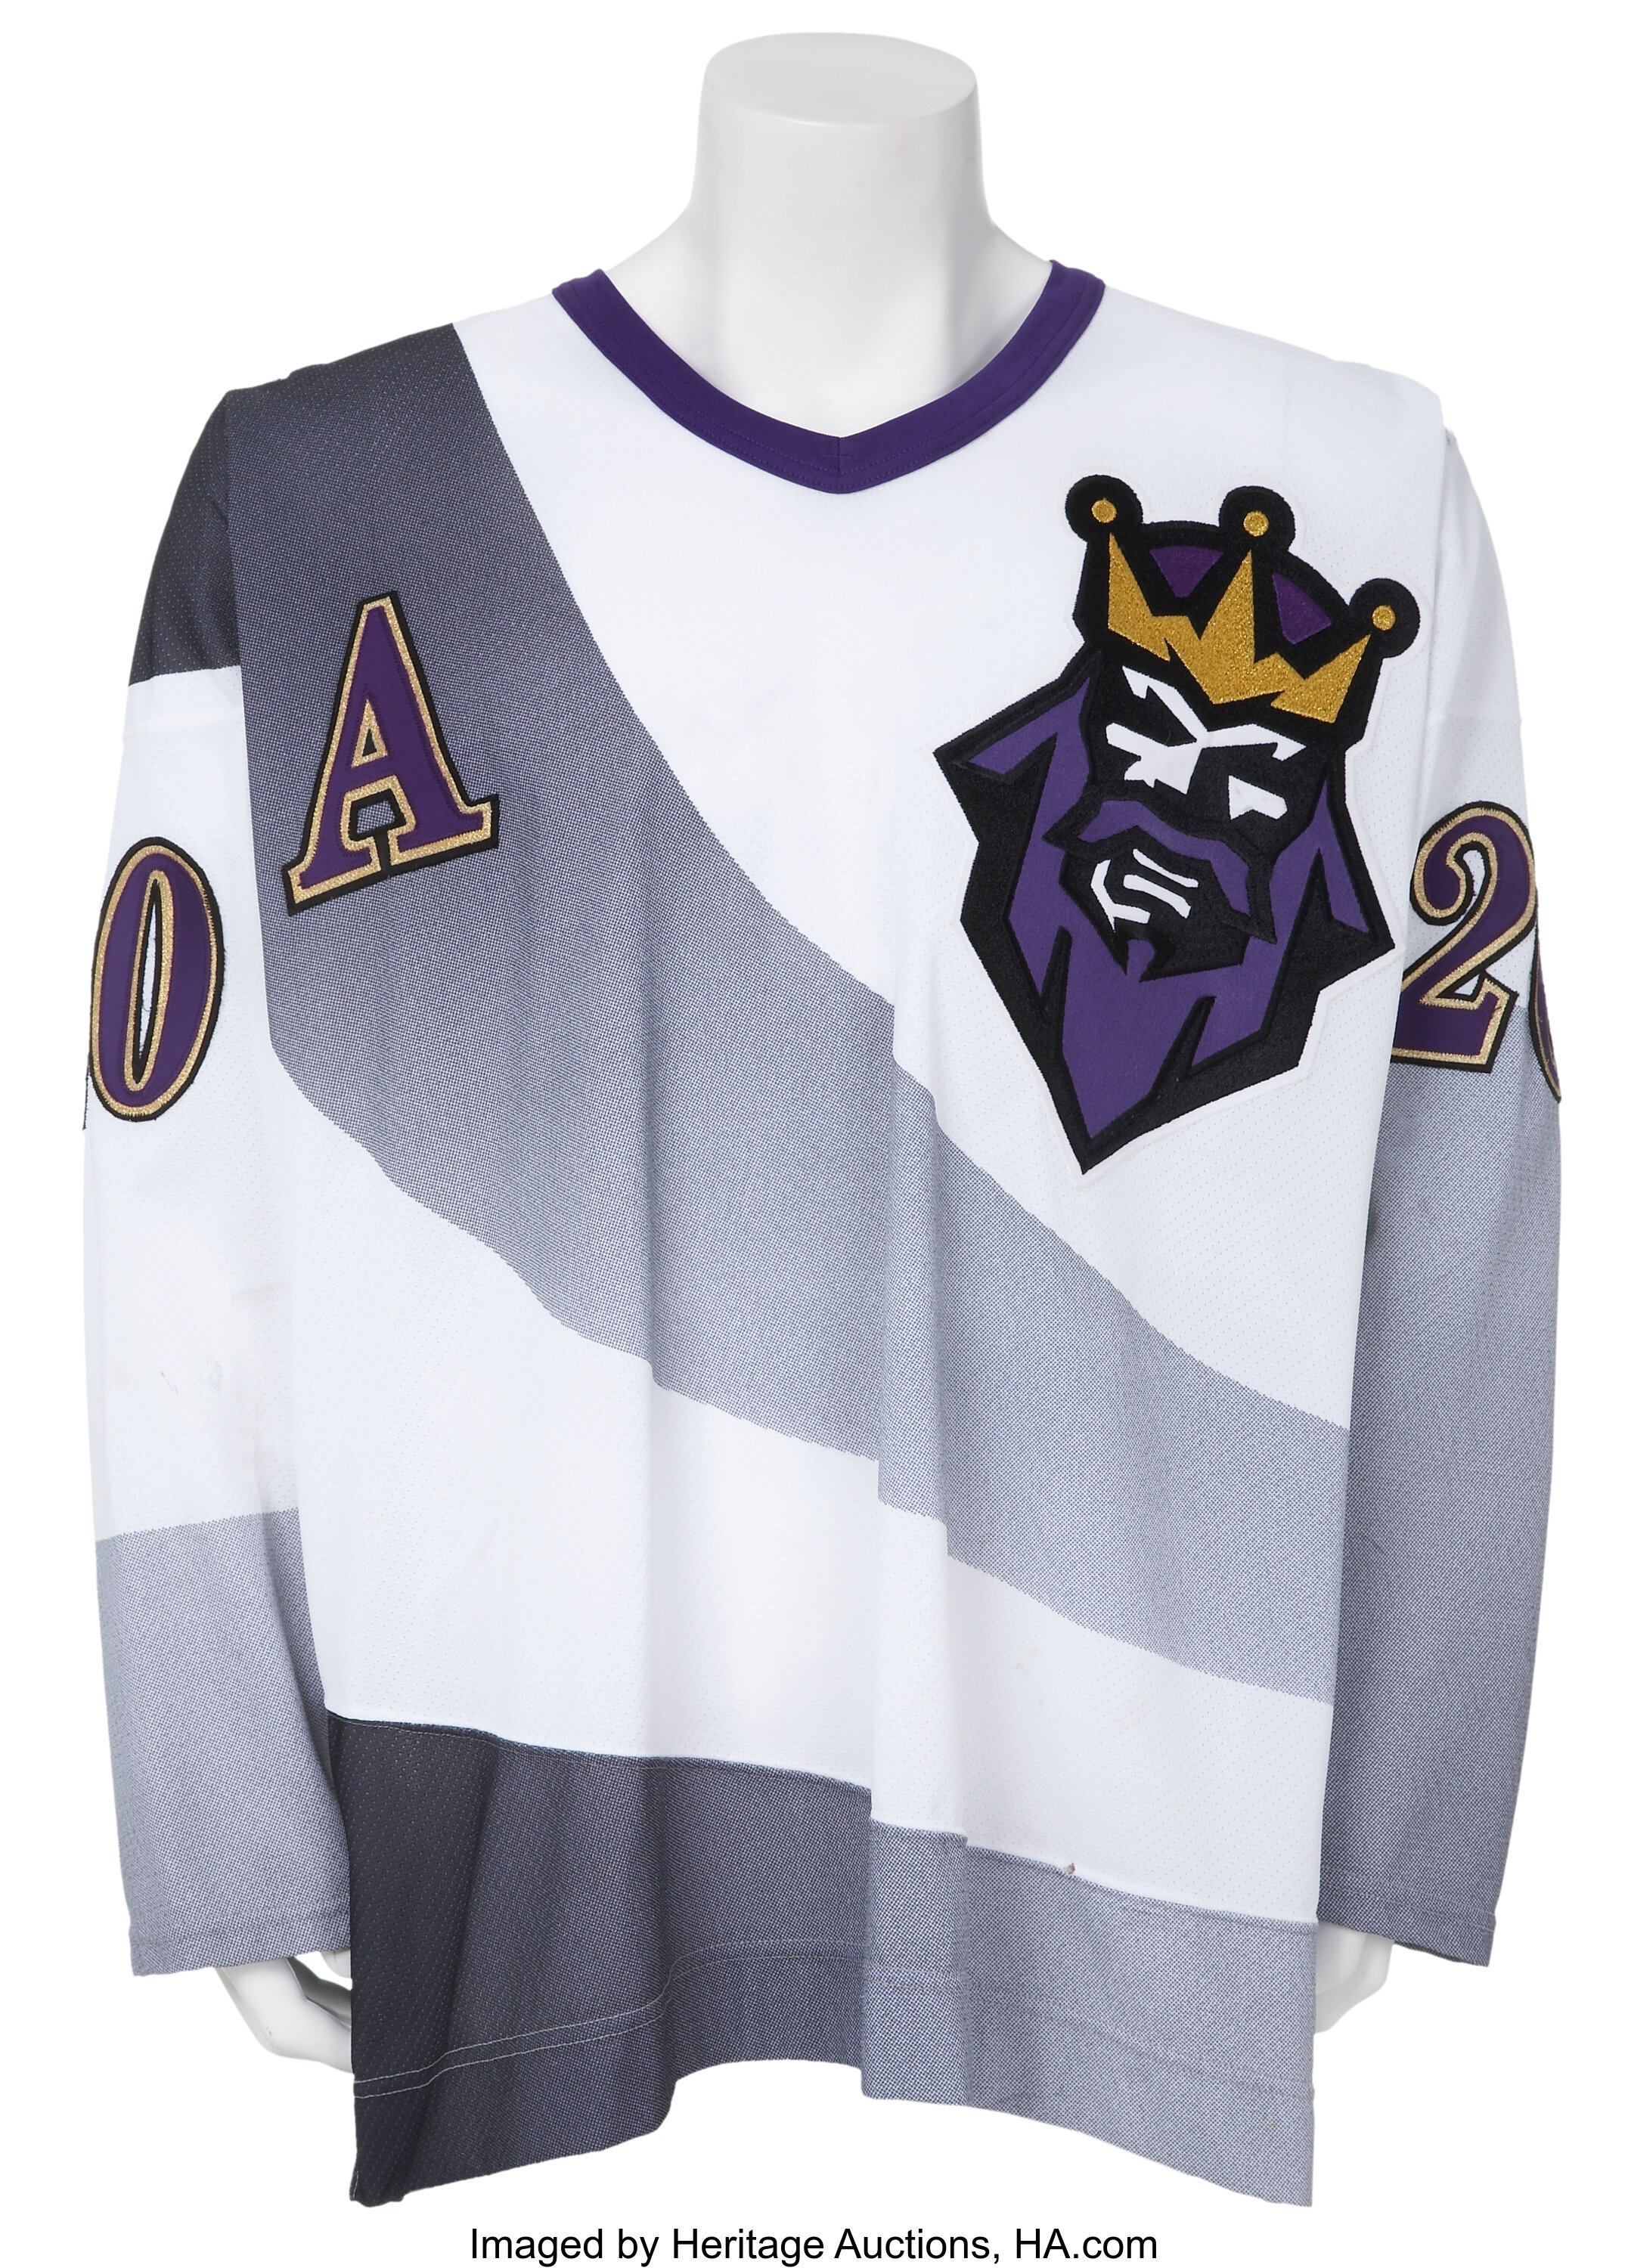 PHT Jersey Review: Los Angeles Kings 1995-96 Burger King jersey - NBC Sports